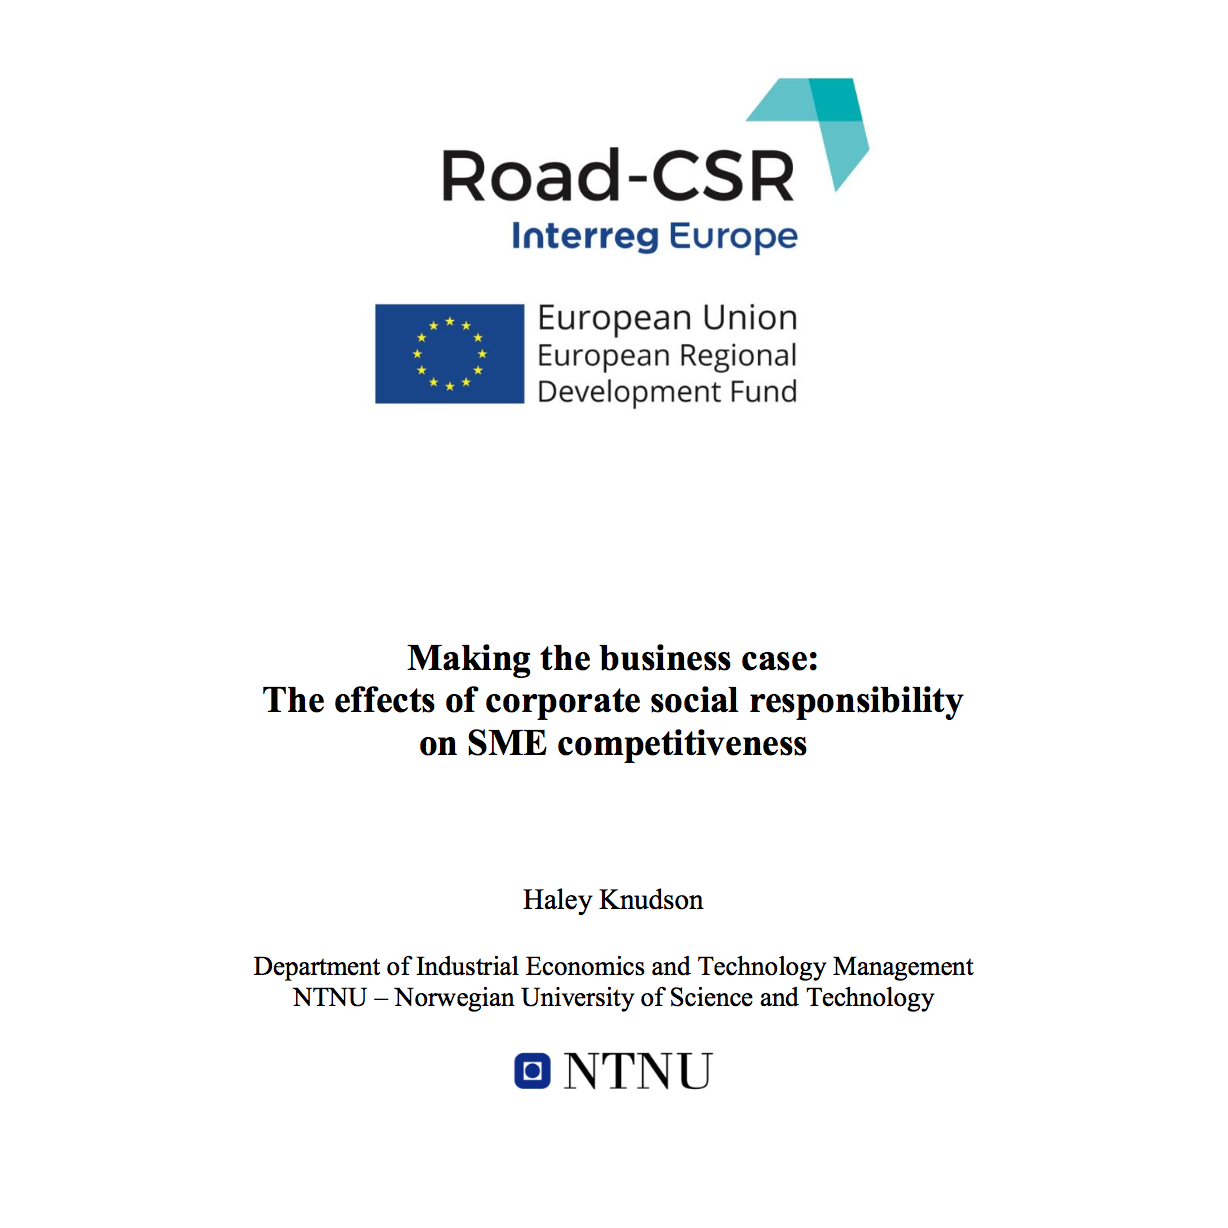 The effects of CSR on SME competitiveness